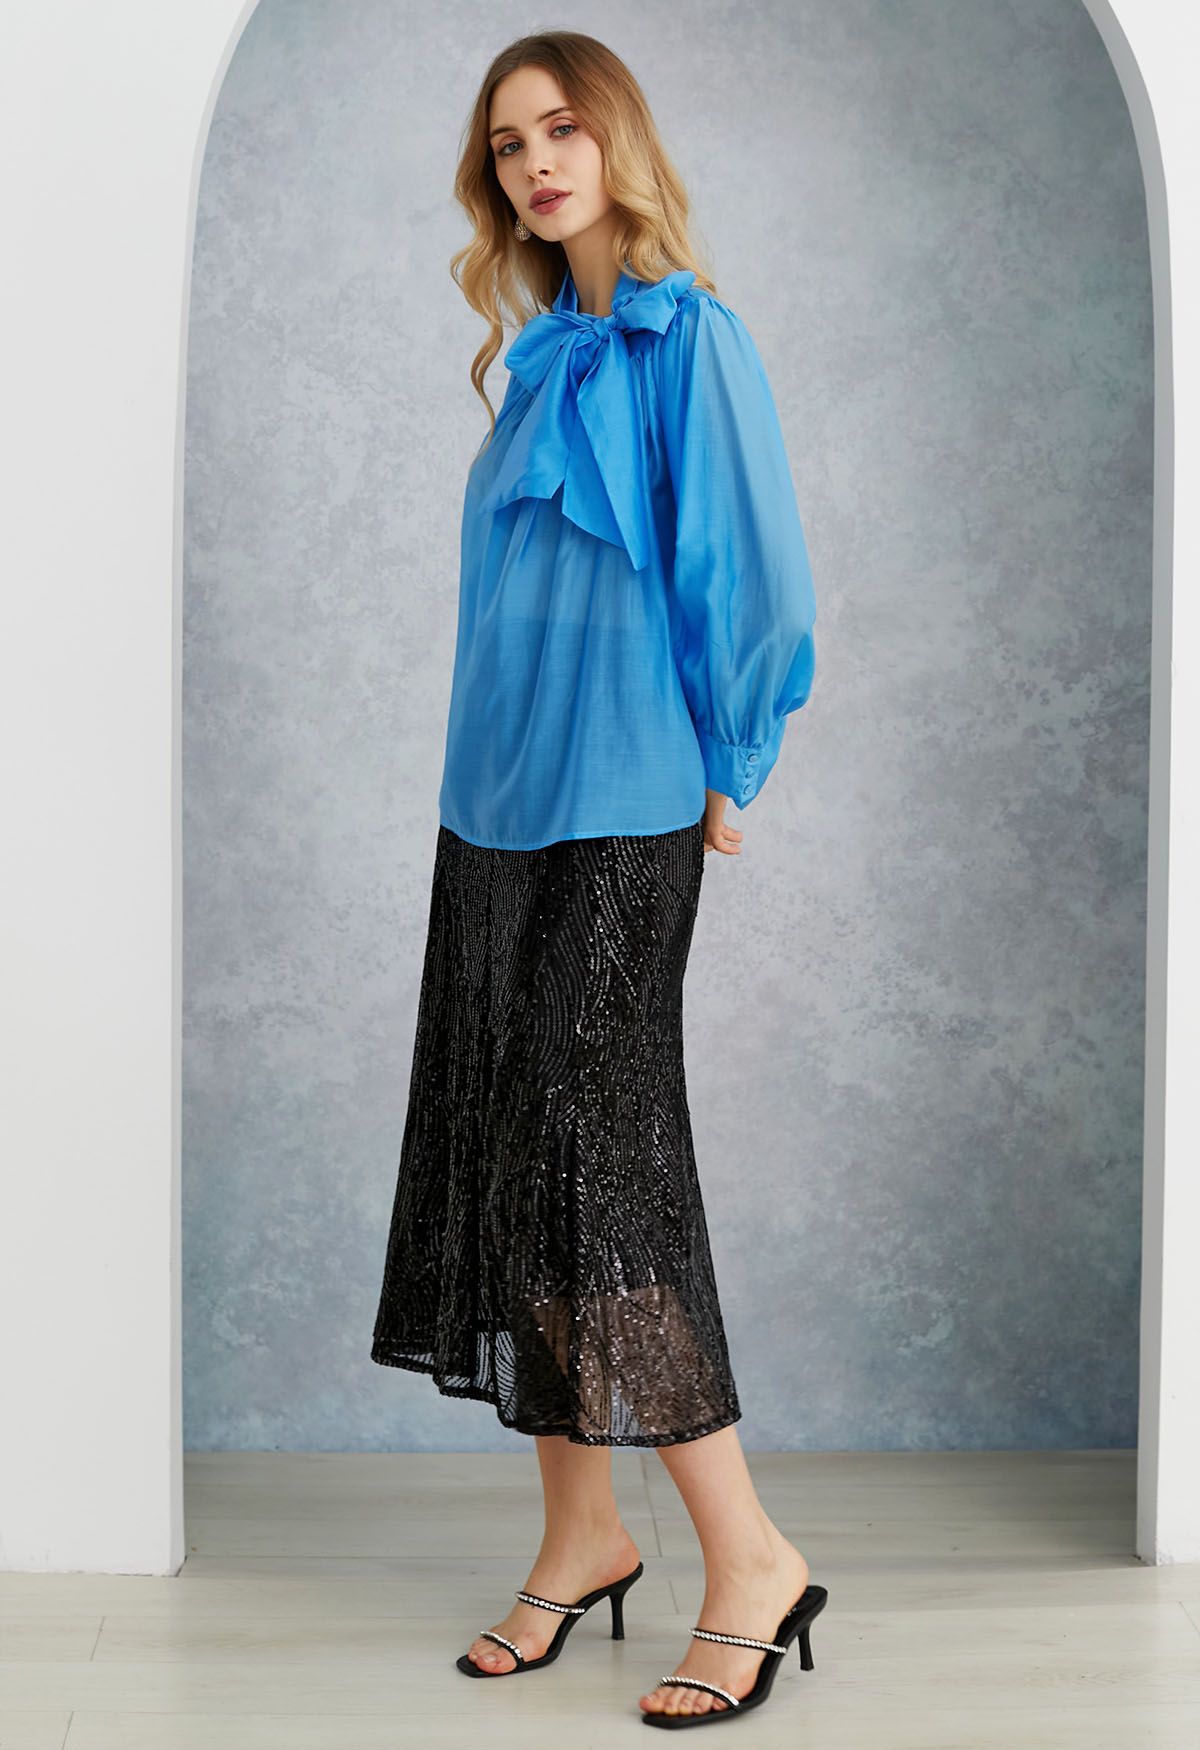 Charming Bowknot Puff Sleeve Sheer Shirt in Blue